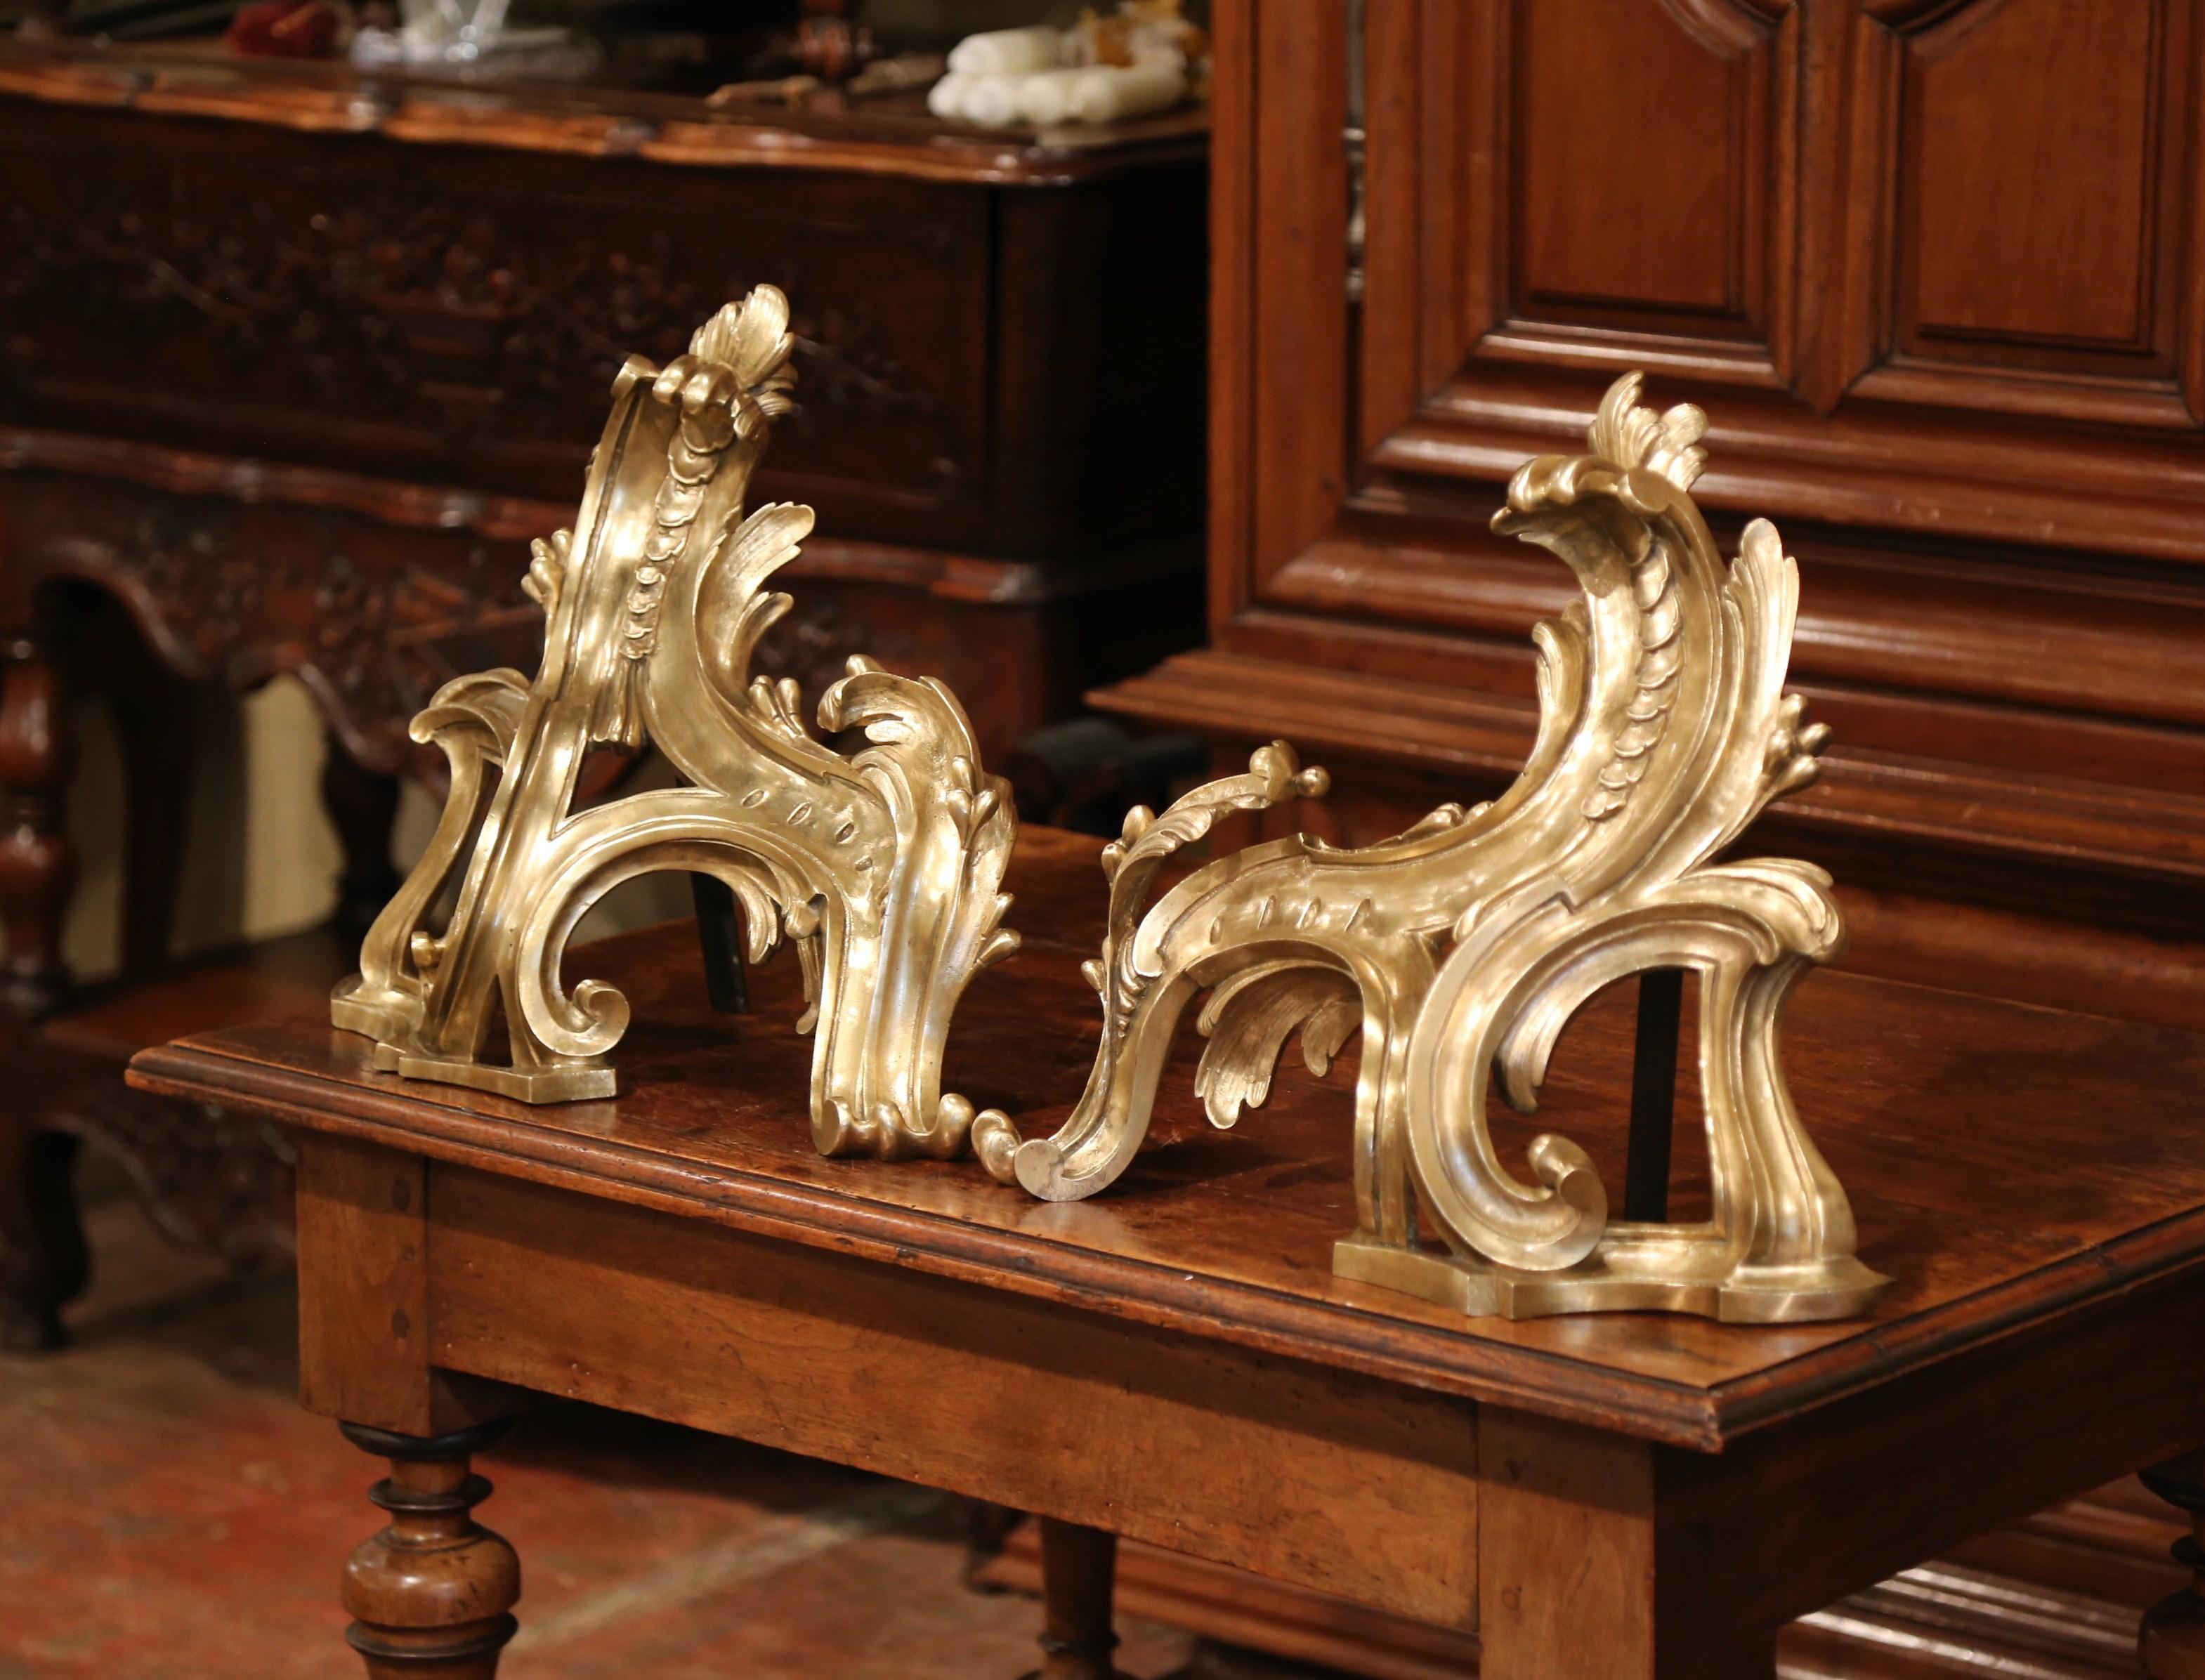 Decorate a fireplace with this large, elegant pair of gilt bronze chenets. Crafted in France circa 1860, each andiron features exquisite, ornate decorations with scroll and leaf motifs. The Baroque fireplace essentials are in excellent condition